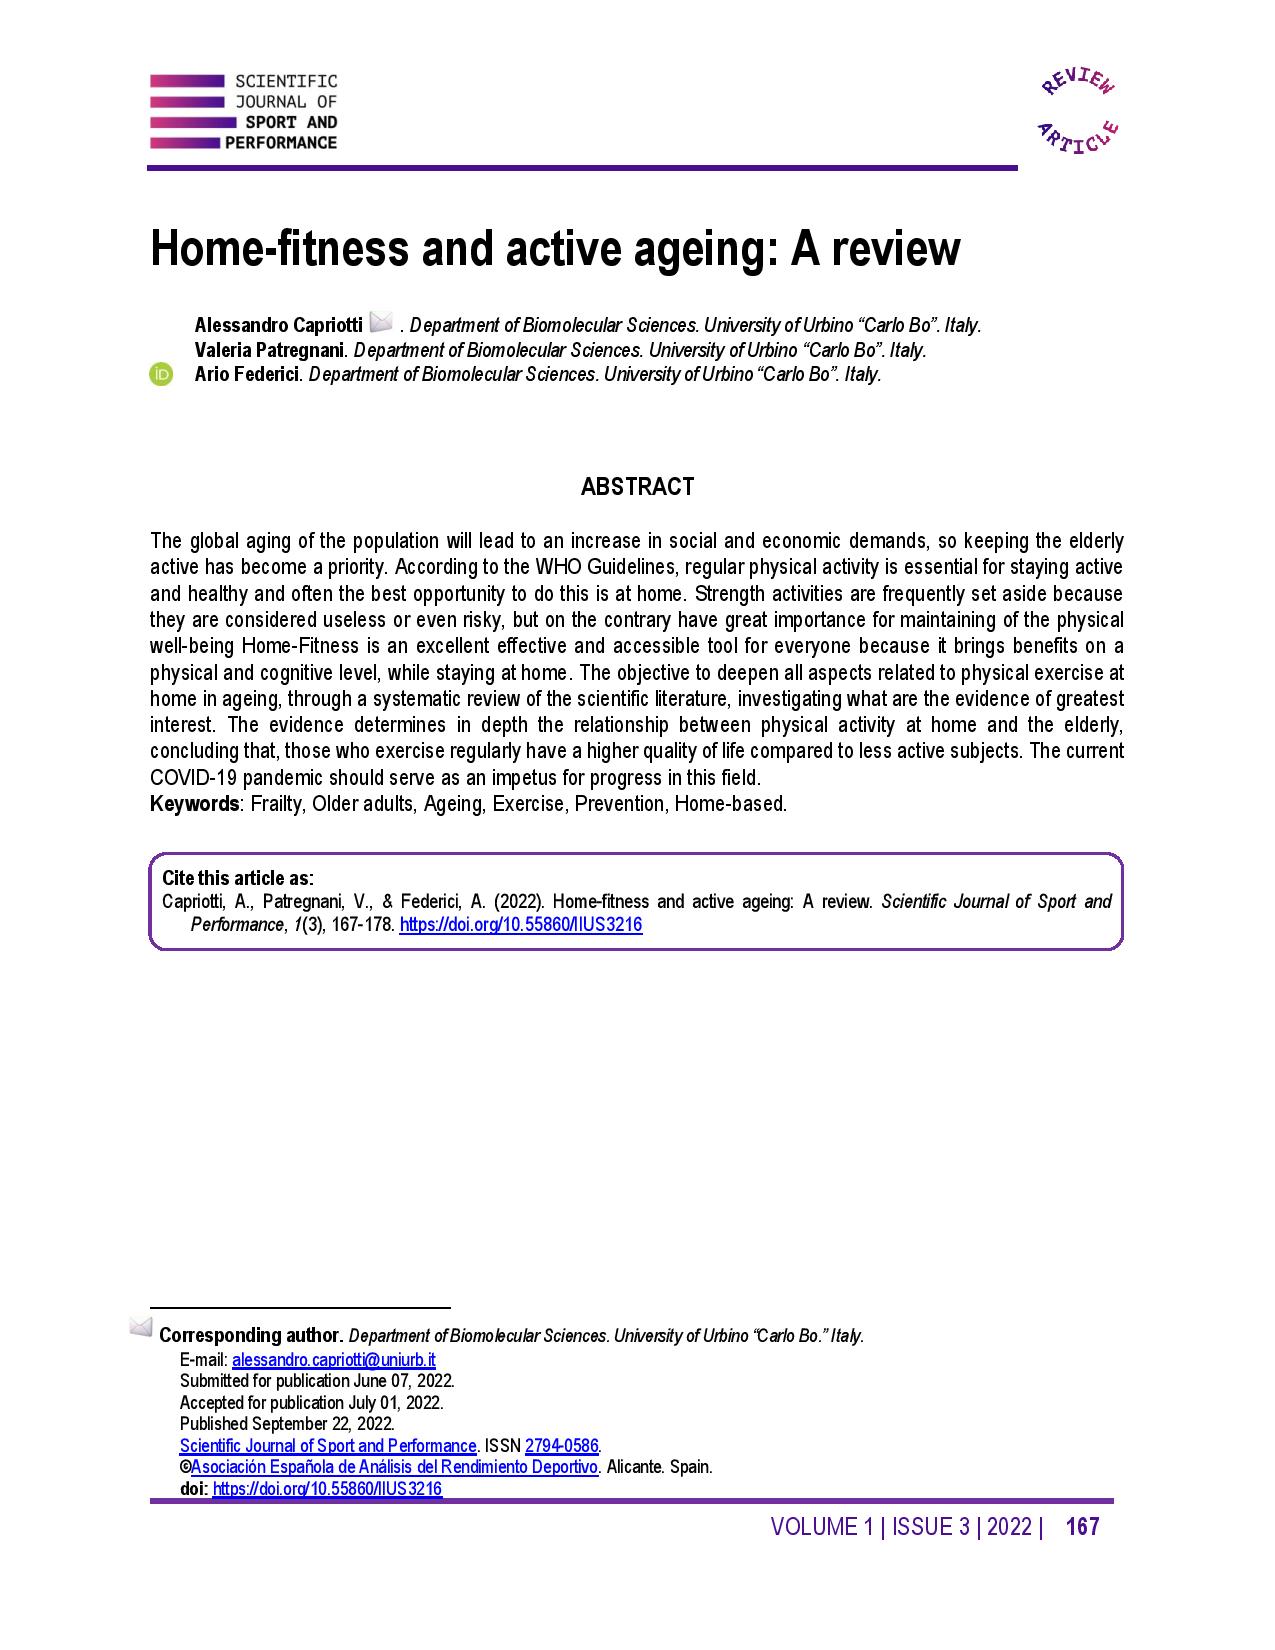 Home-fitness and active ageing: A review